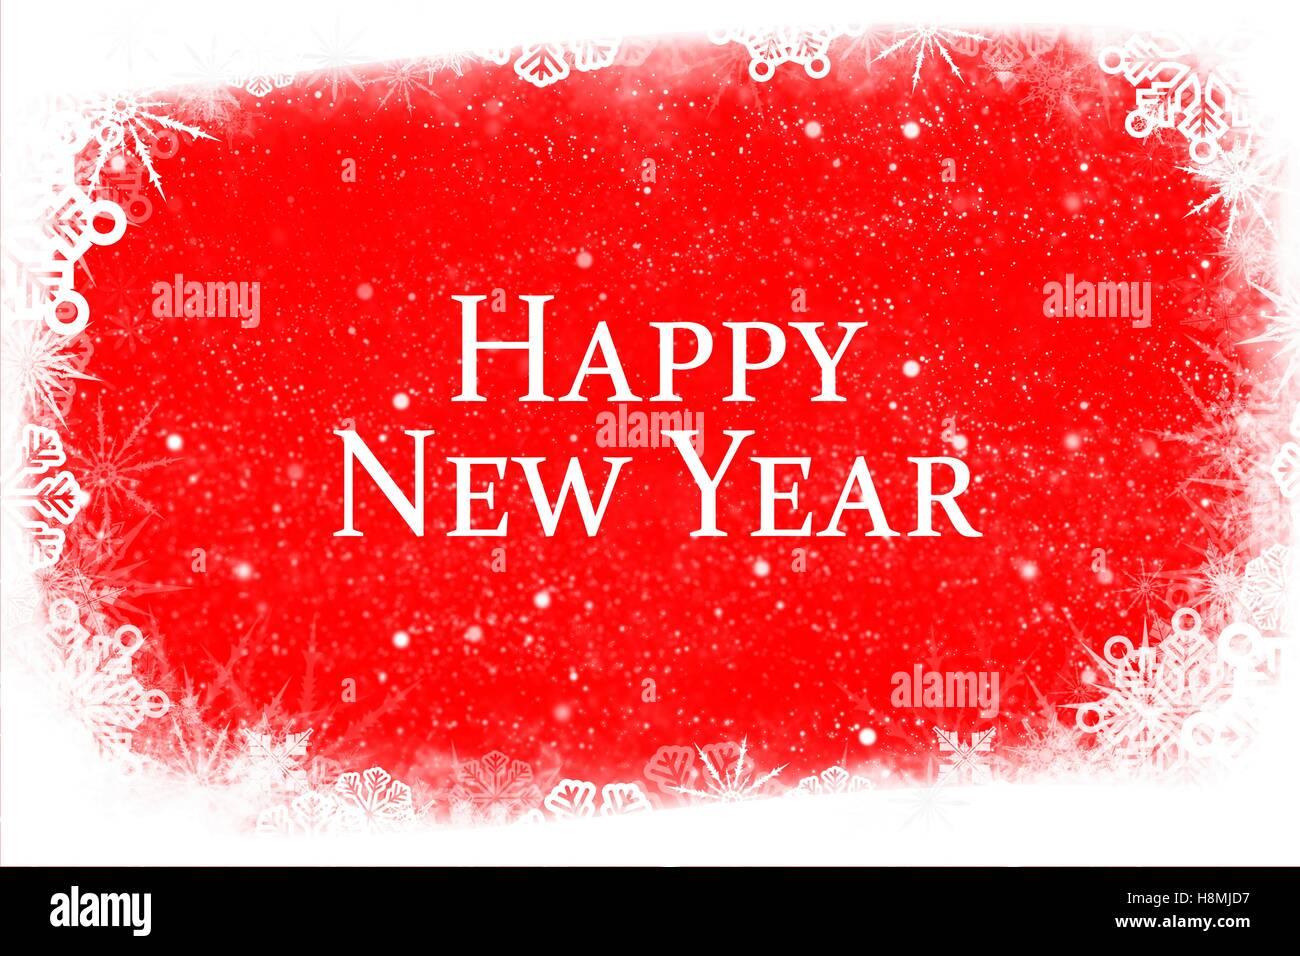 New Year Message on Red Background Design Stock Photo